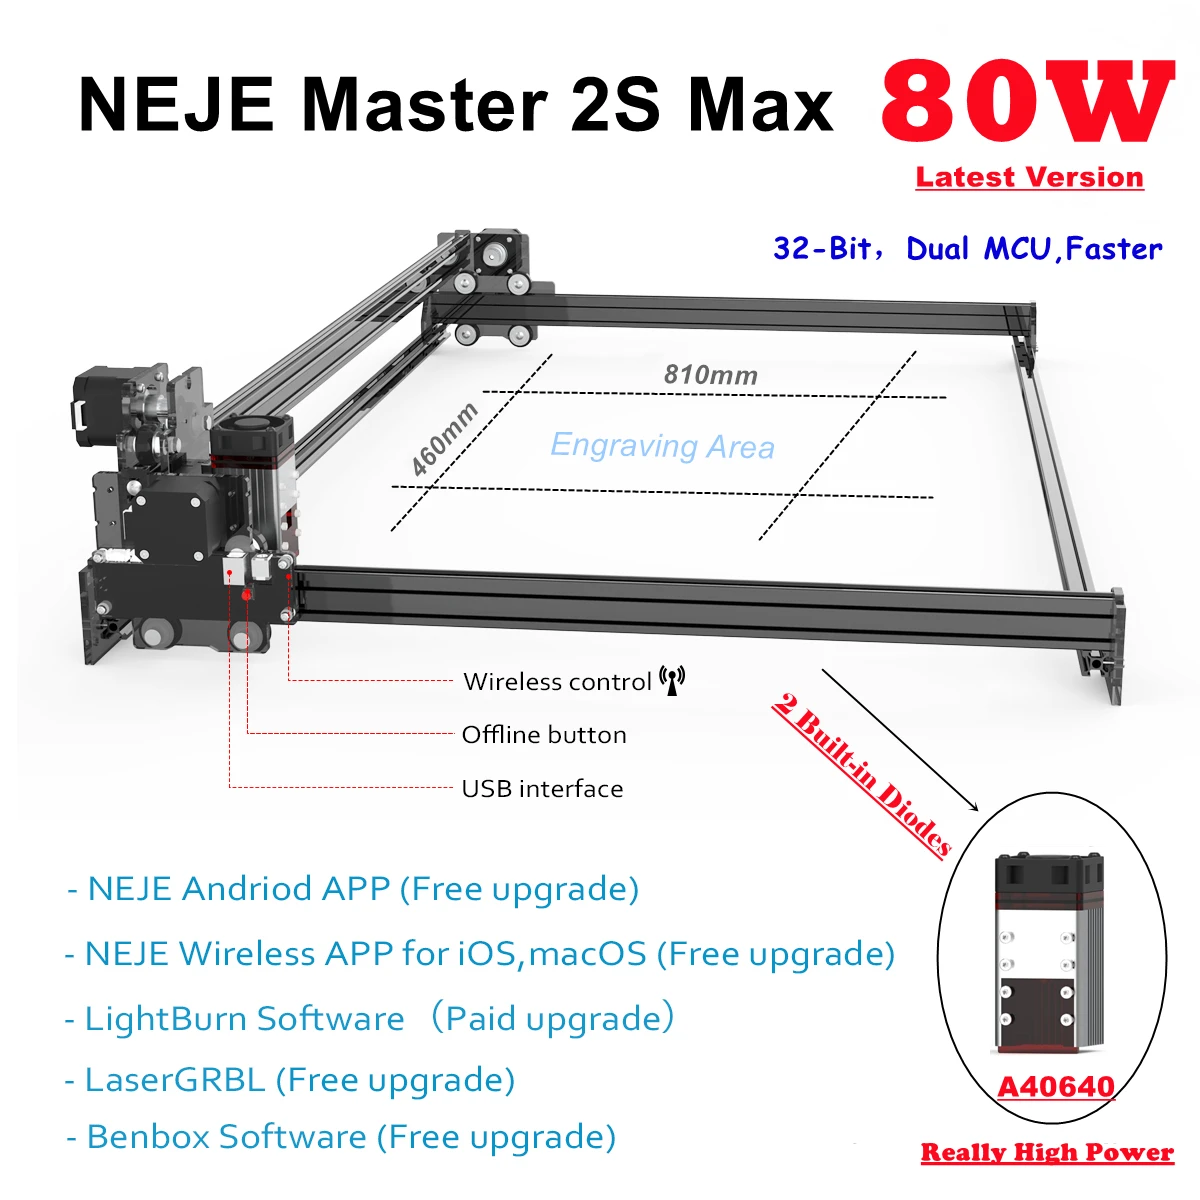 

NEJE Master 2S Max 80W A40640 CNC Wood Laser Engraver Cutter Cutting Engraving Machine Router Lightburn LaserGRBL App Control